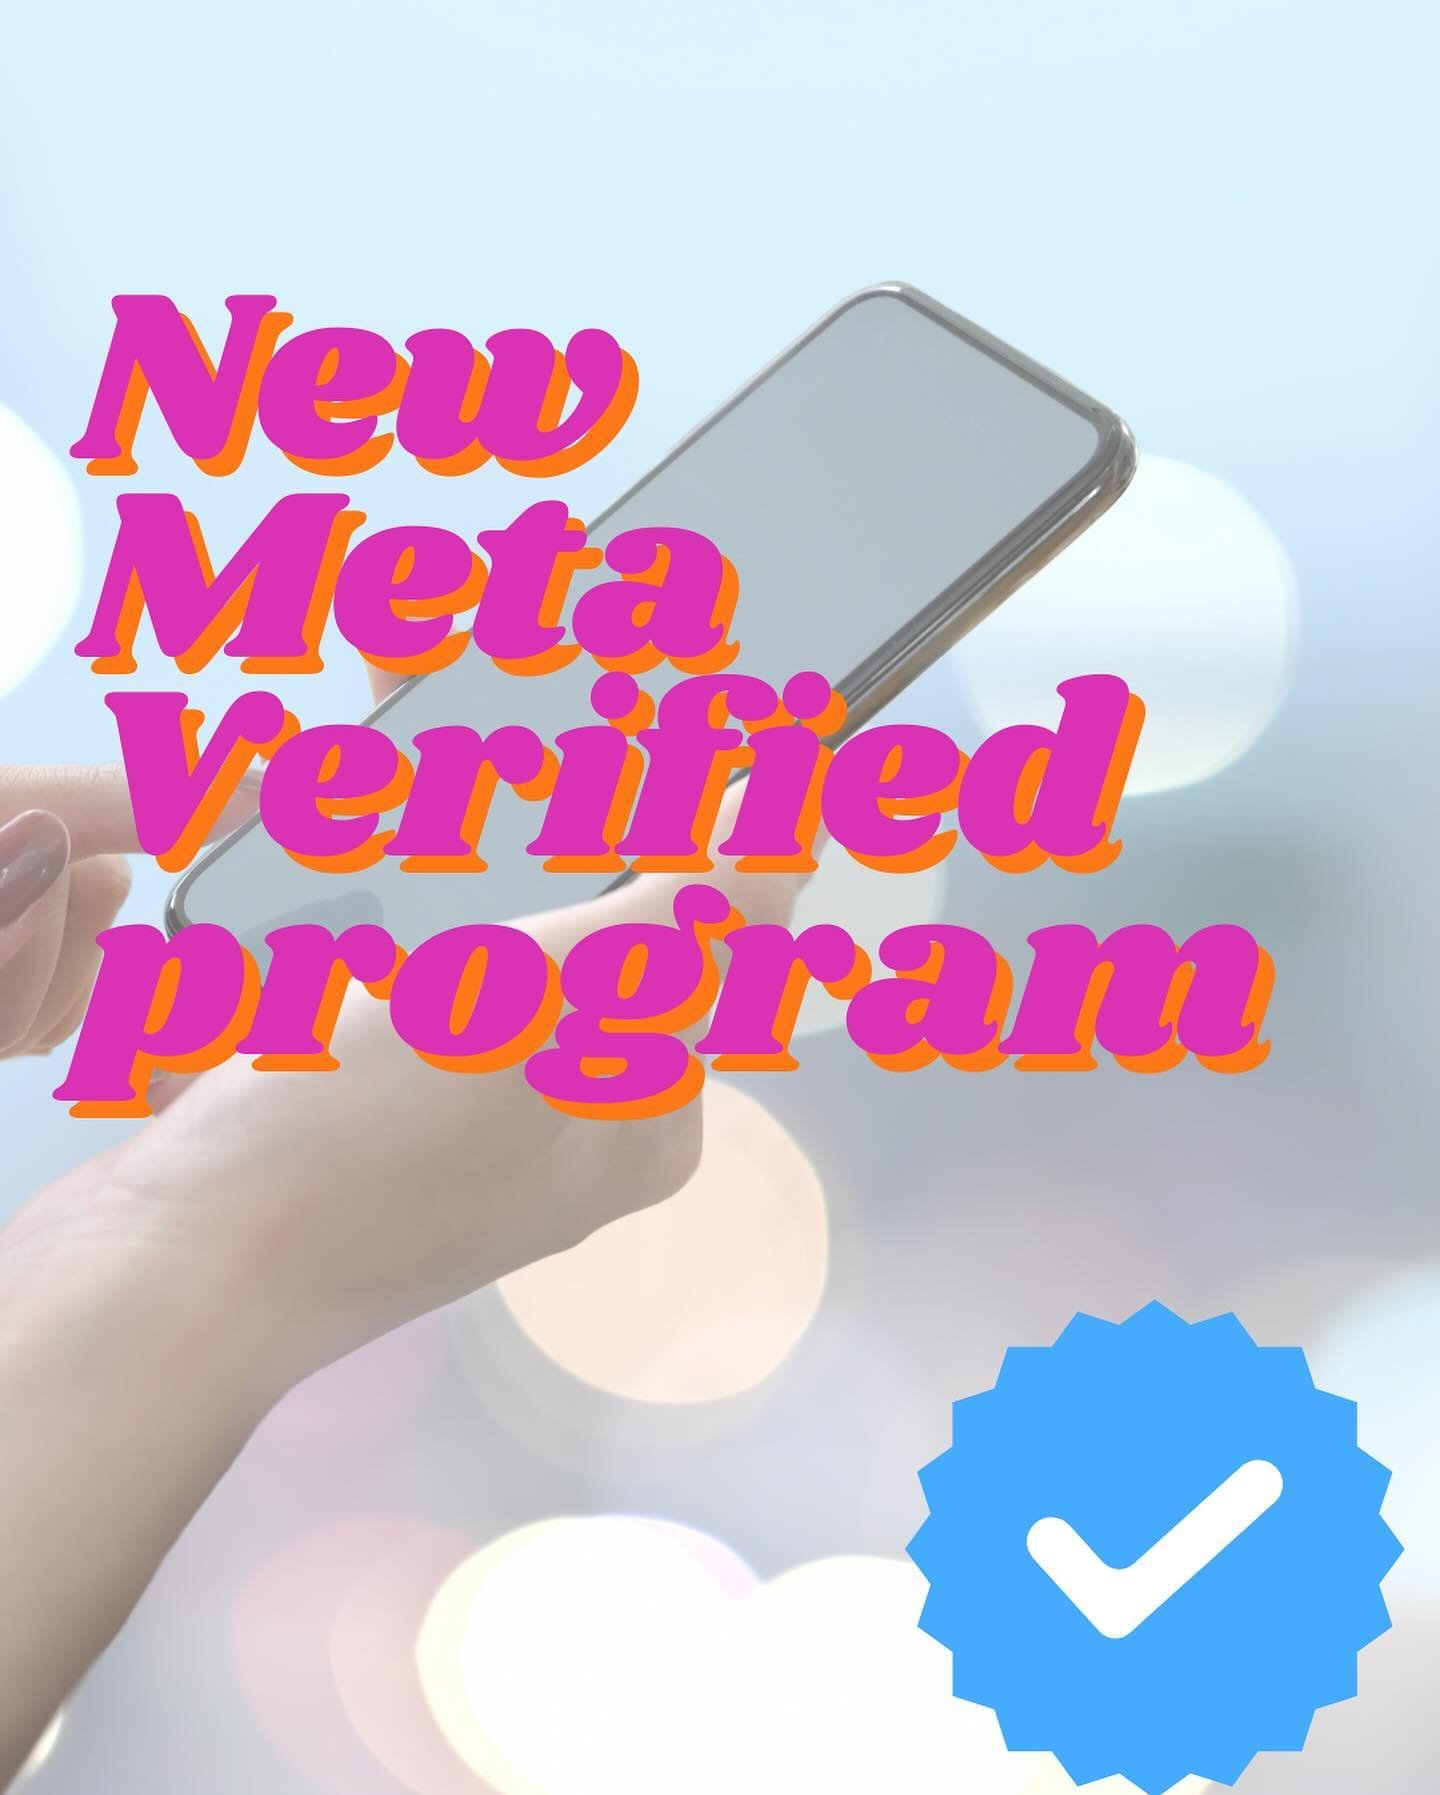 🚨 Update from Meta: New tiers for Meta Verified are here, offering added benefits to businesses on Facebook and Instagram. 
This expansion aims to cater to companies at different stages of their digital journey. Starting at $14.99/month up to $349.9